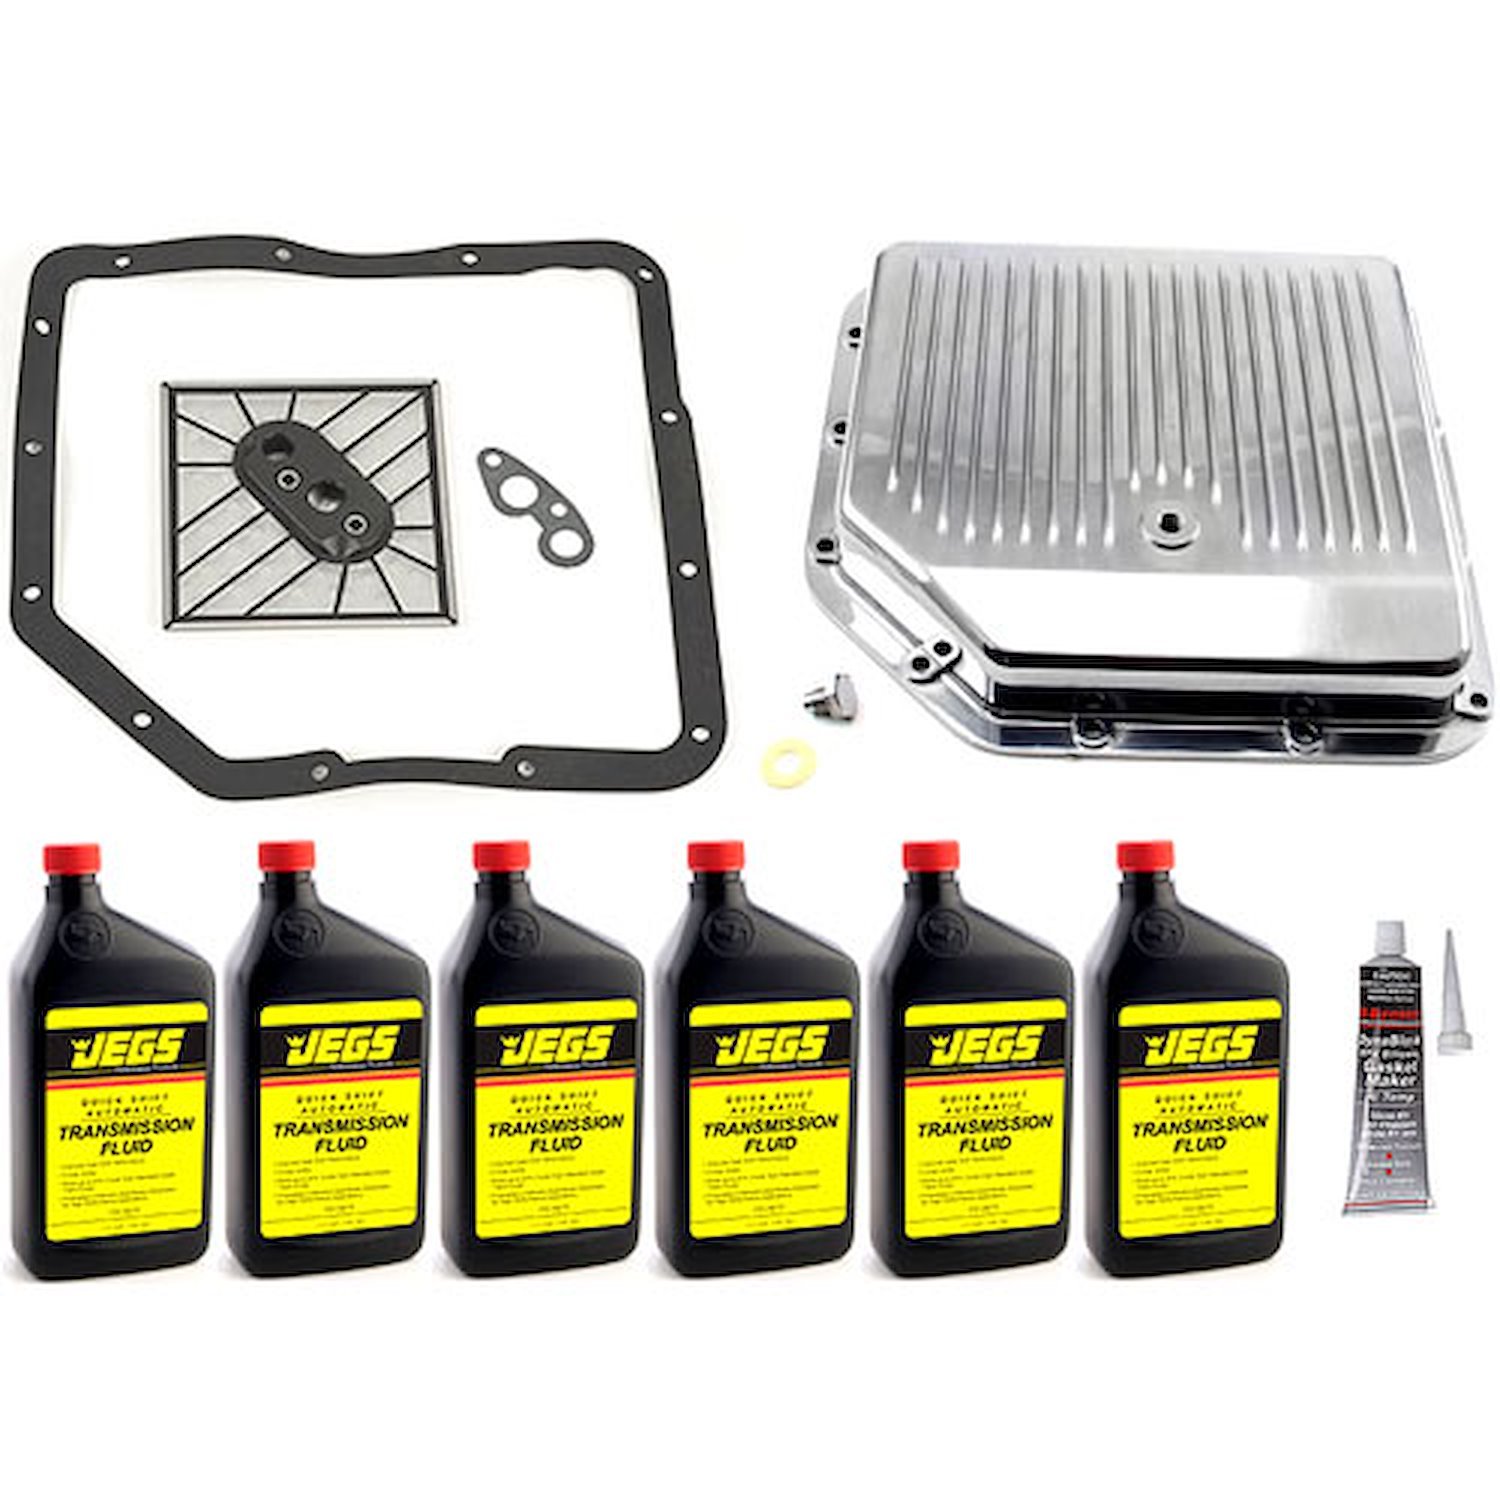 TH350 Transmission Pan Kit Includes: Speedmaster TH350 Finned Aluminum Oil Pan 746-PCE221.1004